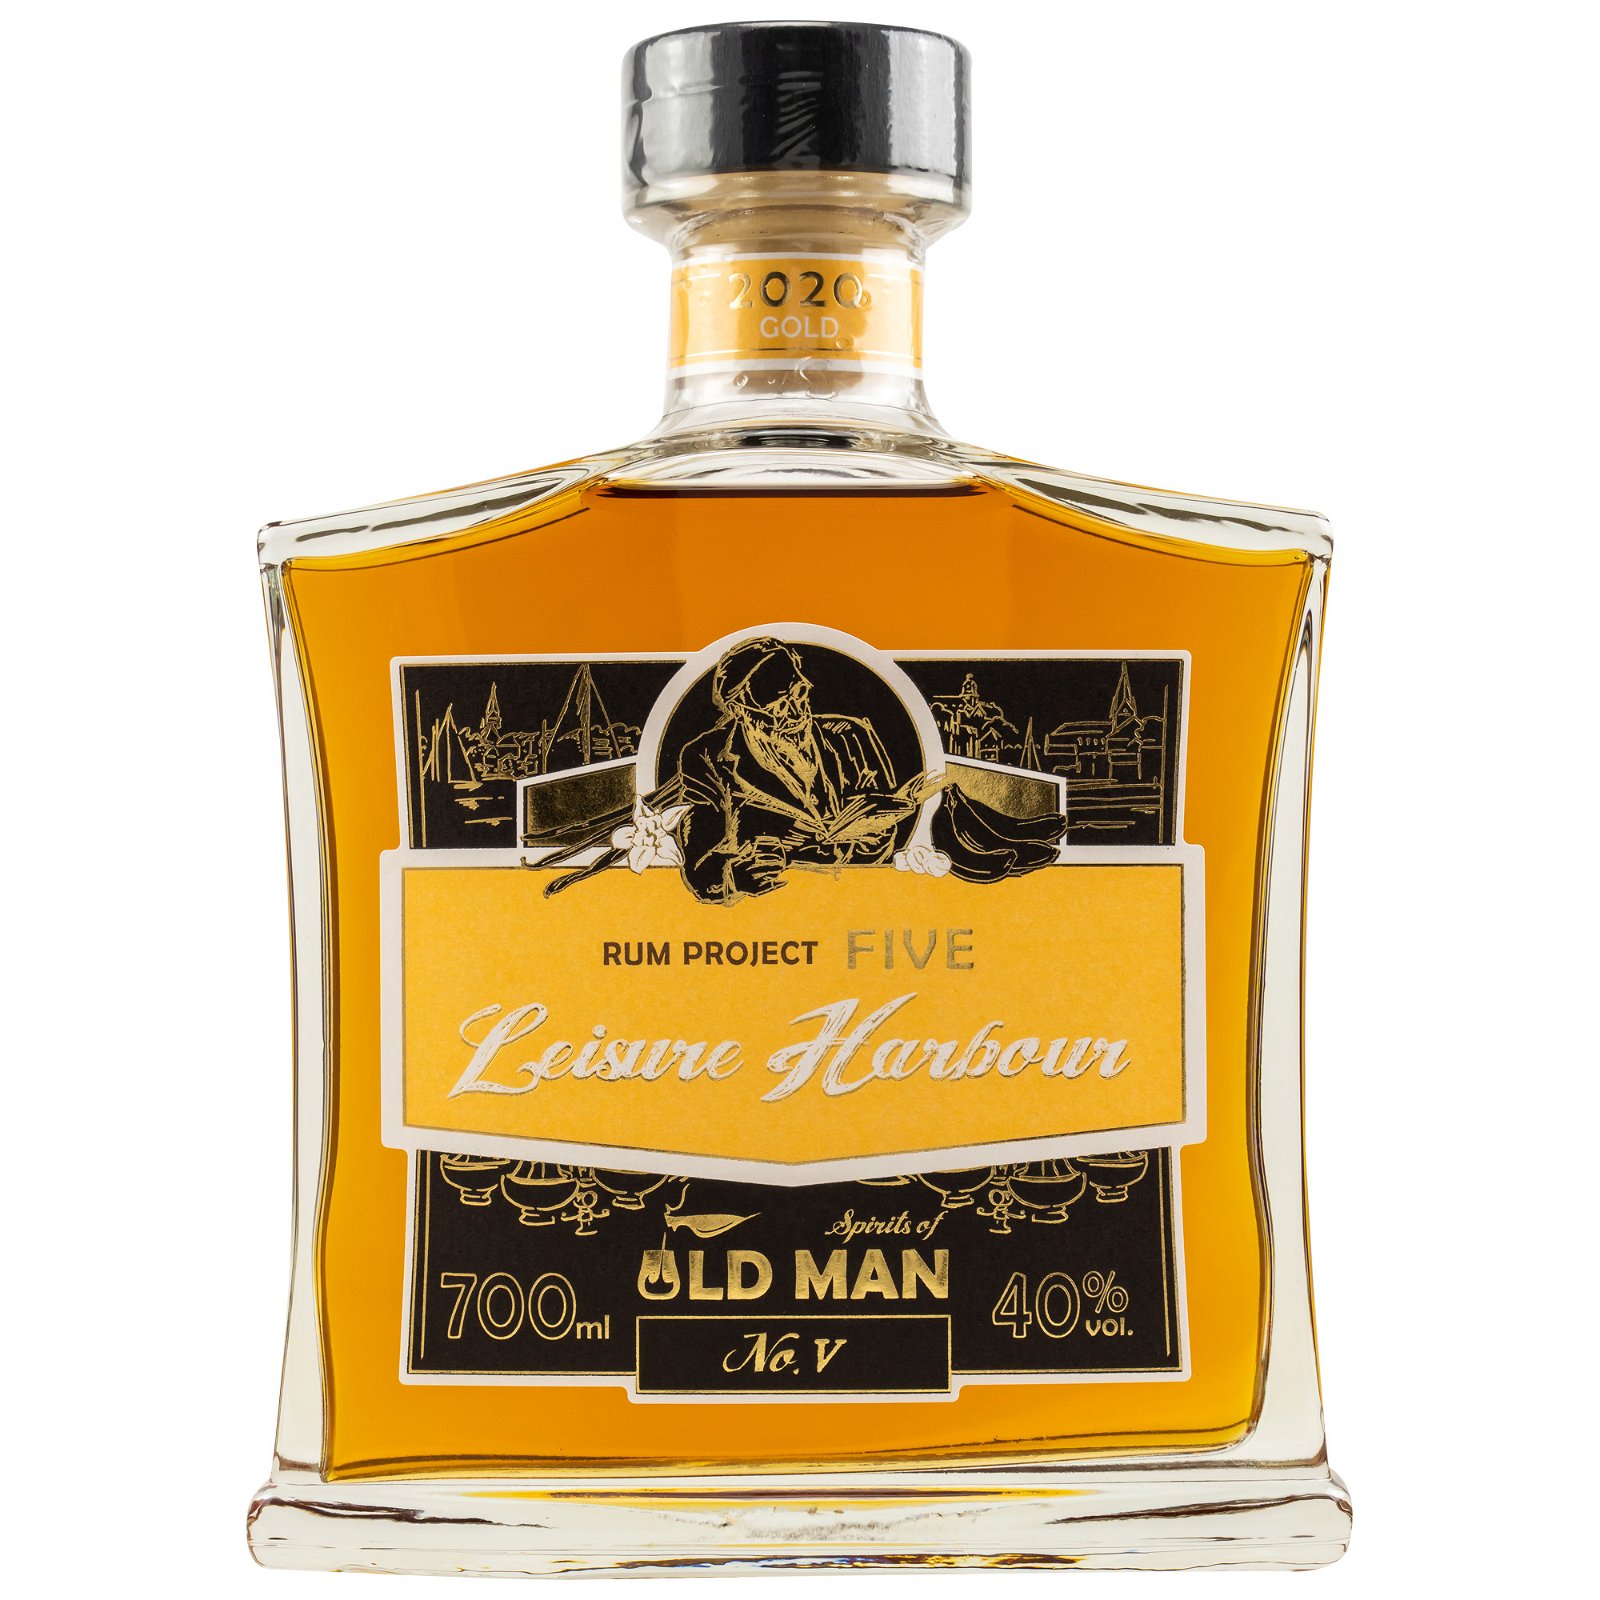 Old Man Rum Project Five Leisure Harbour 2020 Gold Medal